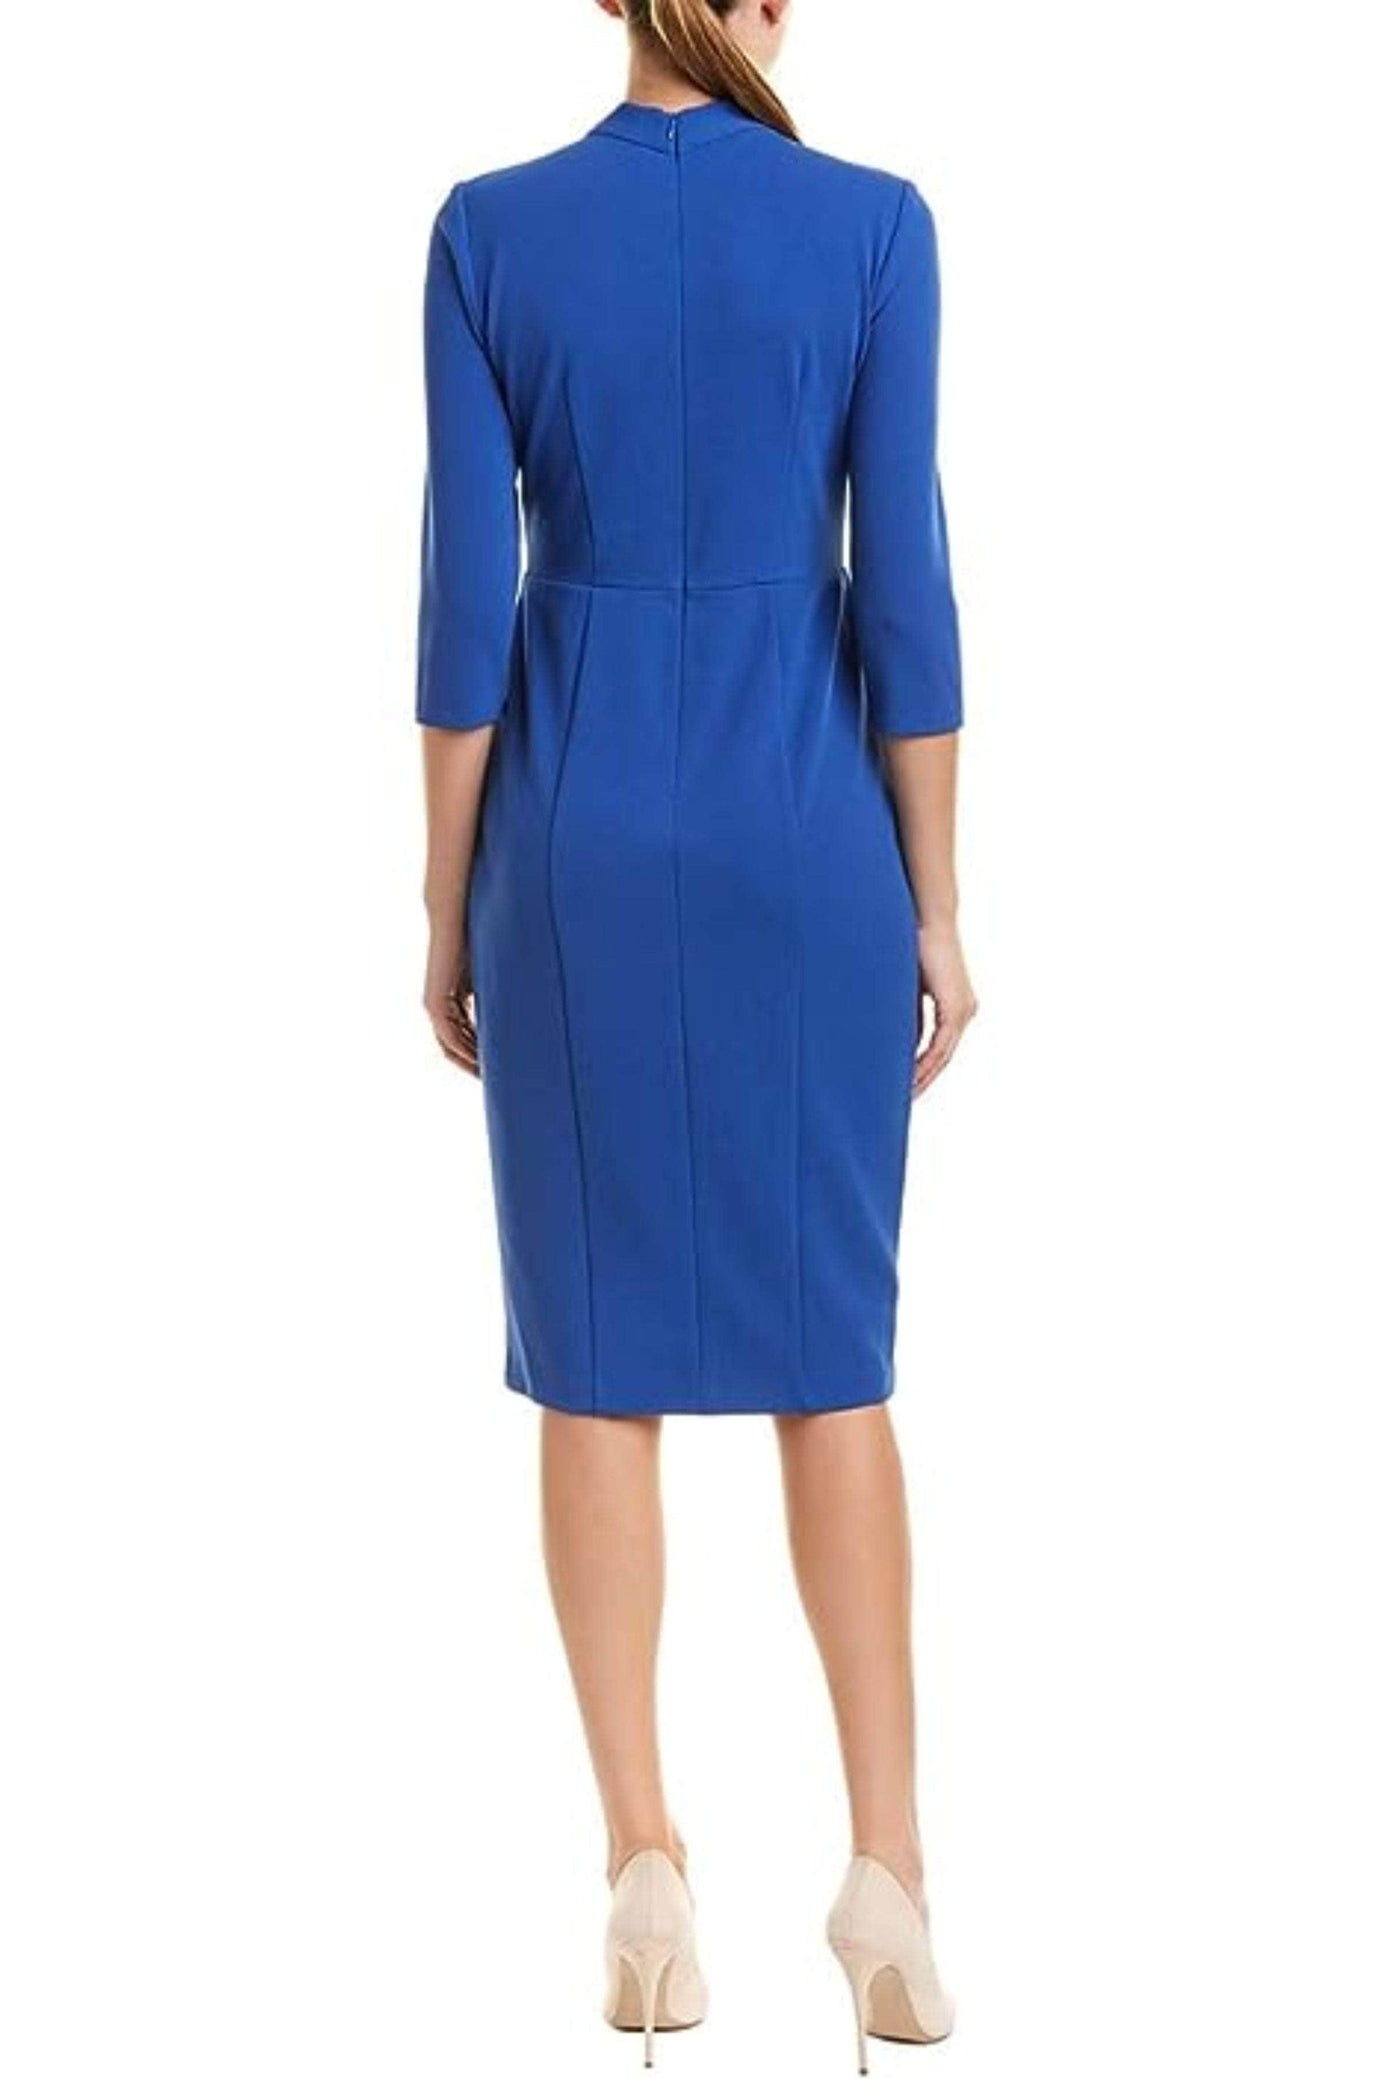 Donna Morgan D6290M - Twisted Neck Sheath Dress Special Occasion Dresses